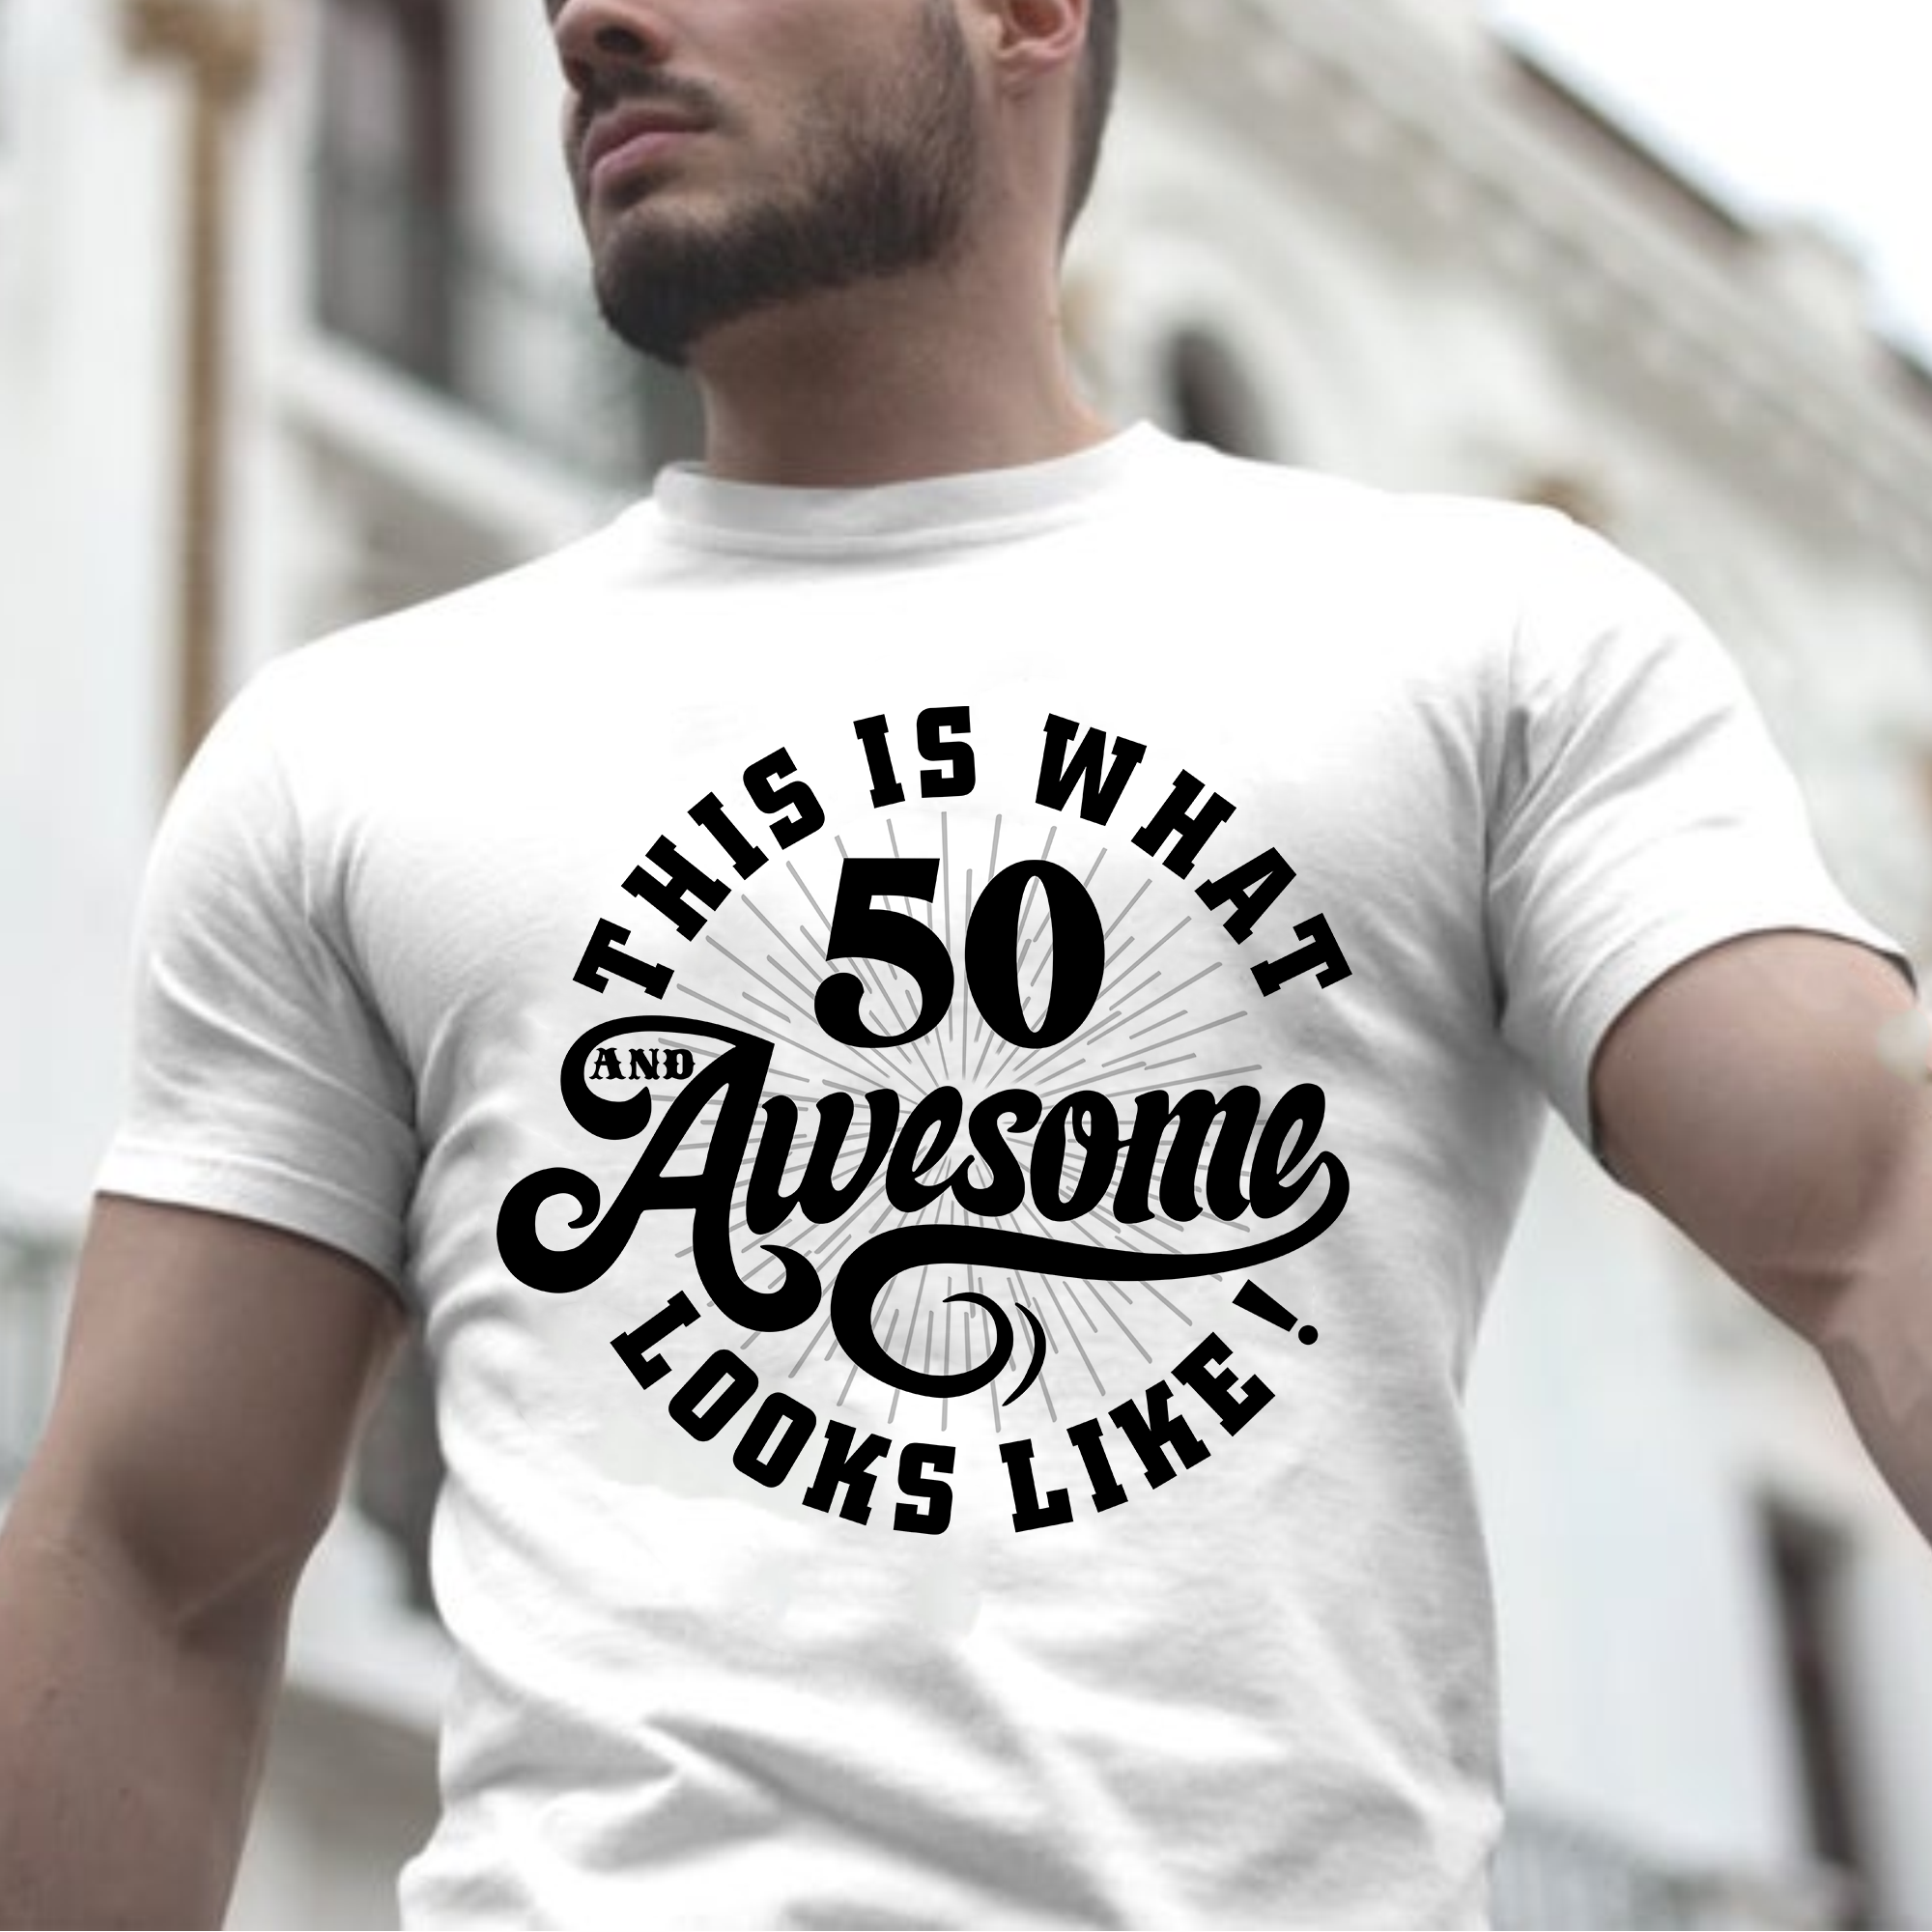 This Is What 50 Awesome Looks Like – Happy 50th Birthday Shirt